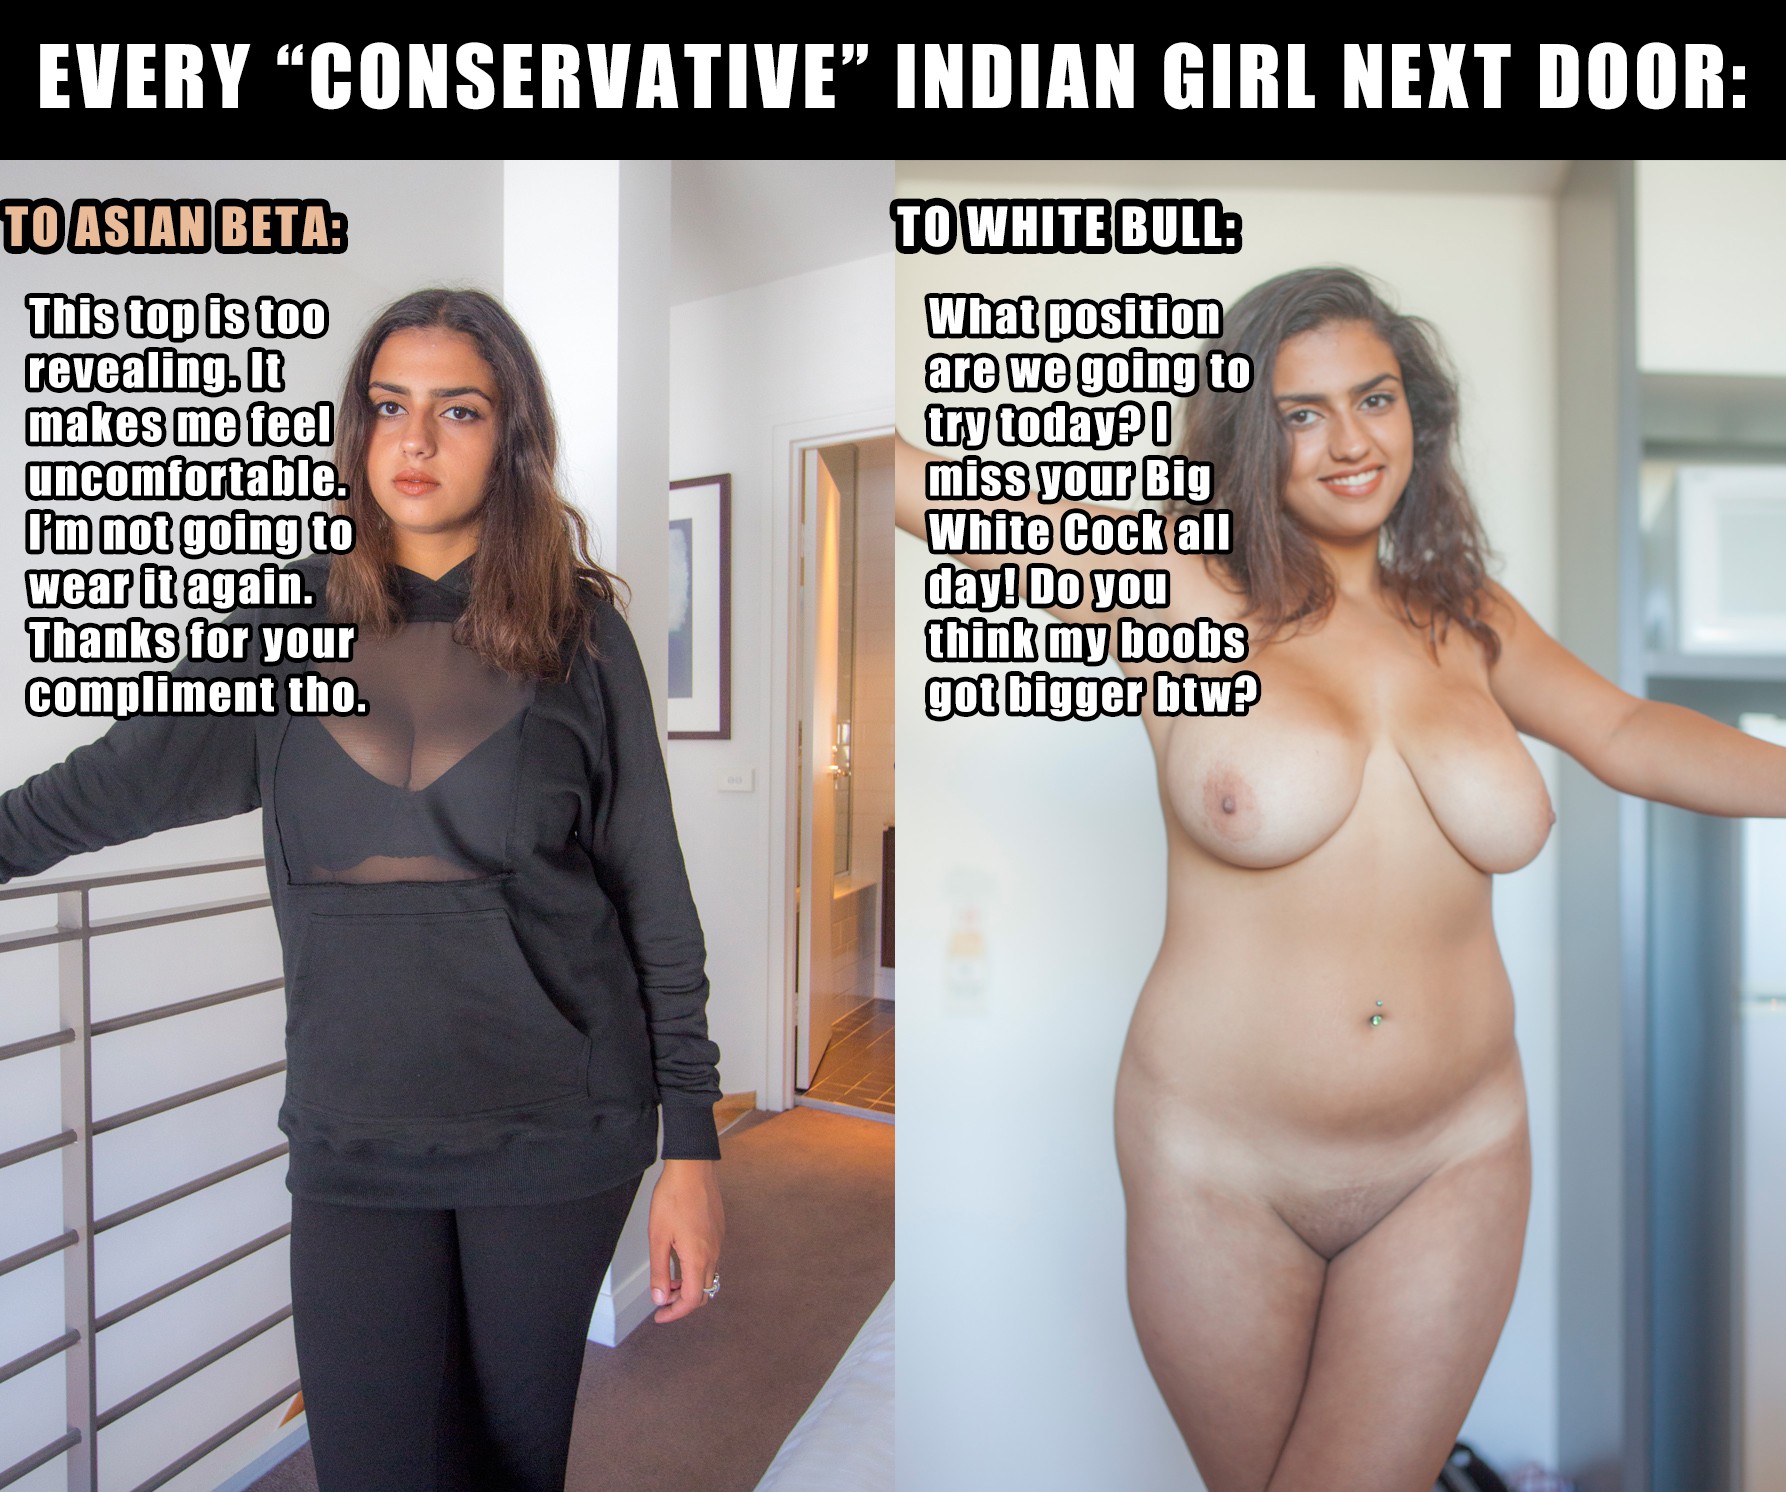 Indian girl next door reacts to white bull cock vs beta dick photo image pic